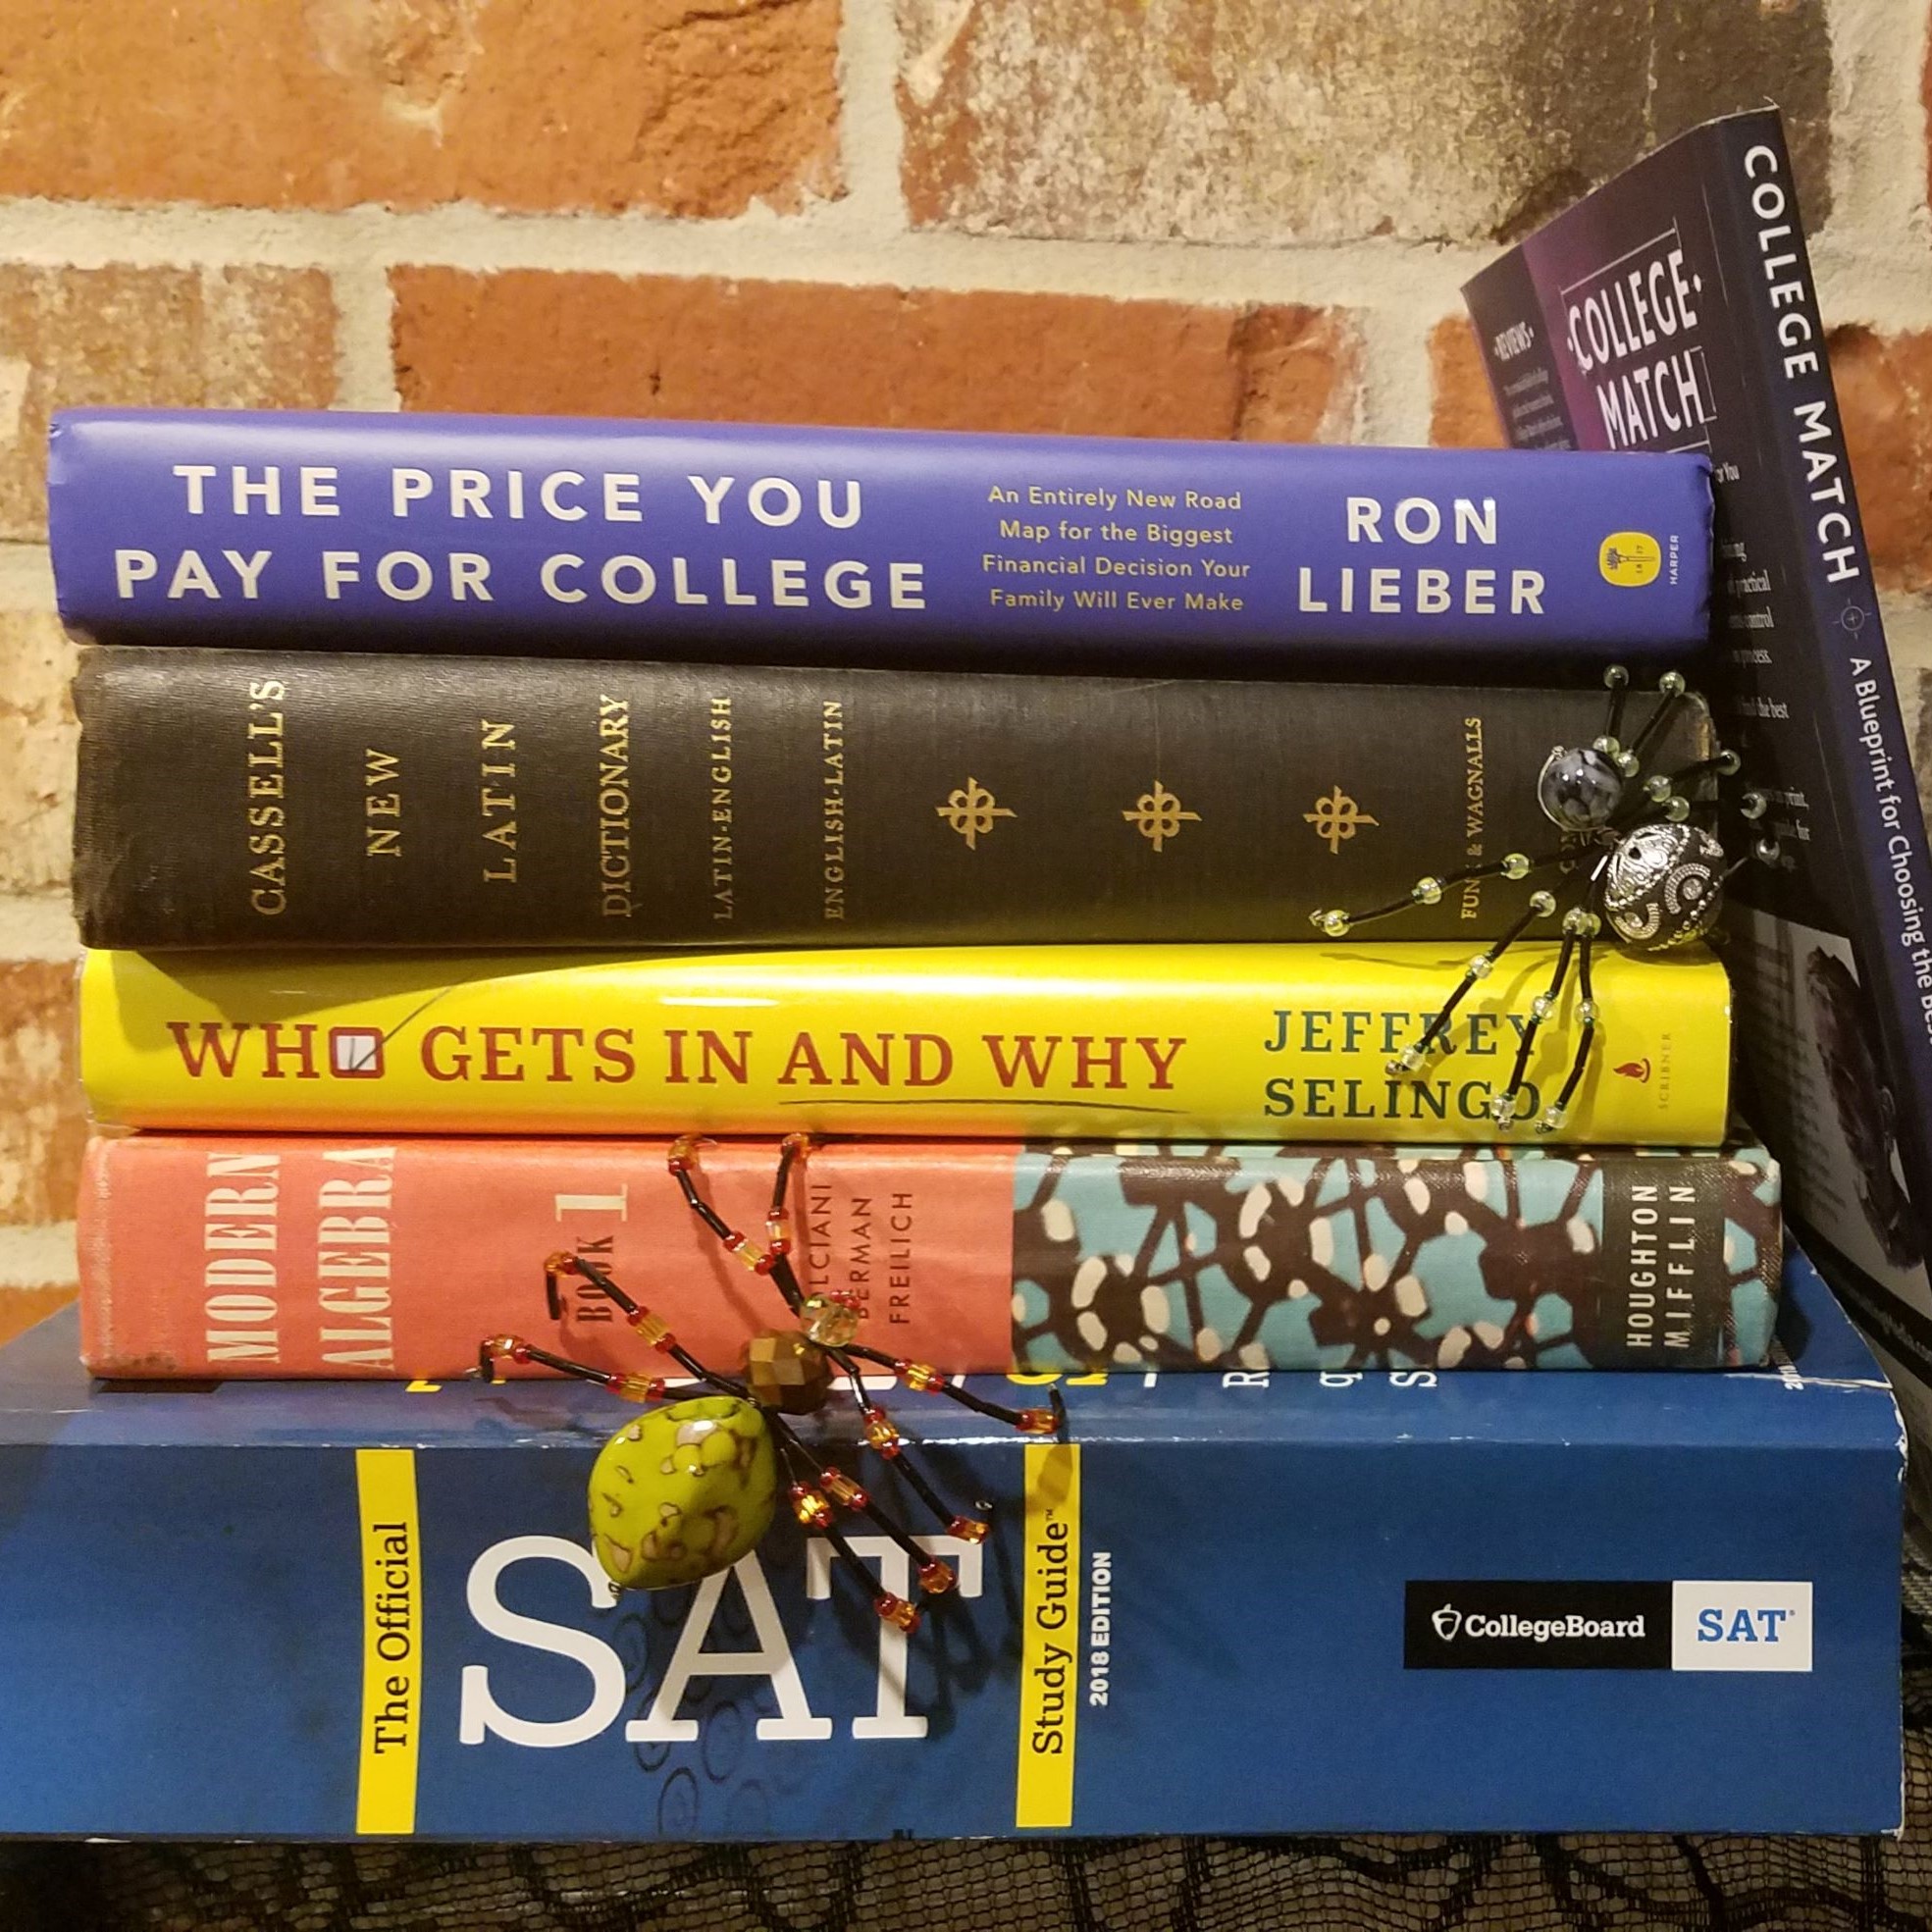 A stack of books, including The Price You Pay for College, Who Gets In and Why, College Match, an SAT study guide, a Latin dictionary, and a vintage algebra book. Two beaded spiders are positioned crawling on the books.